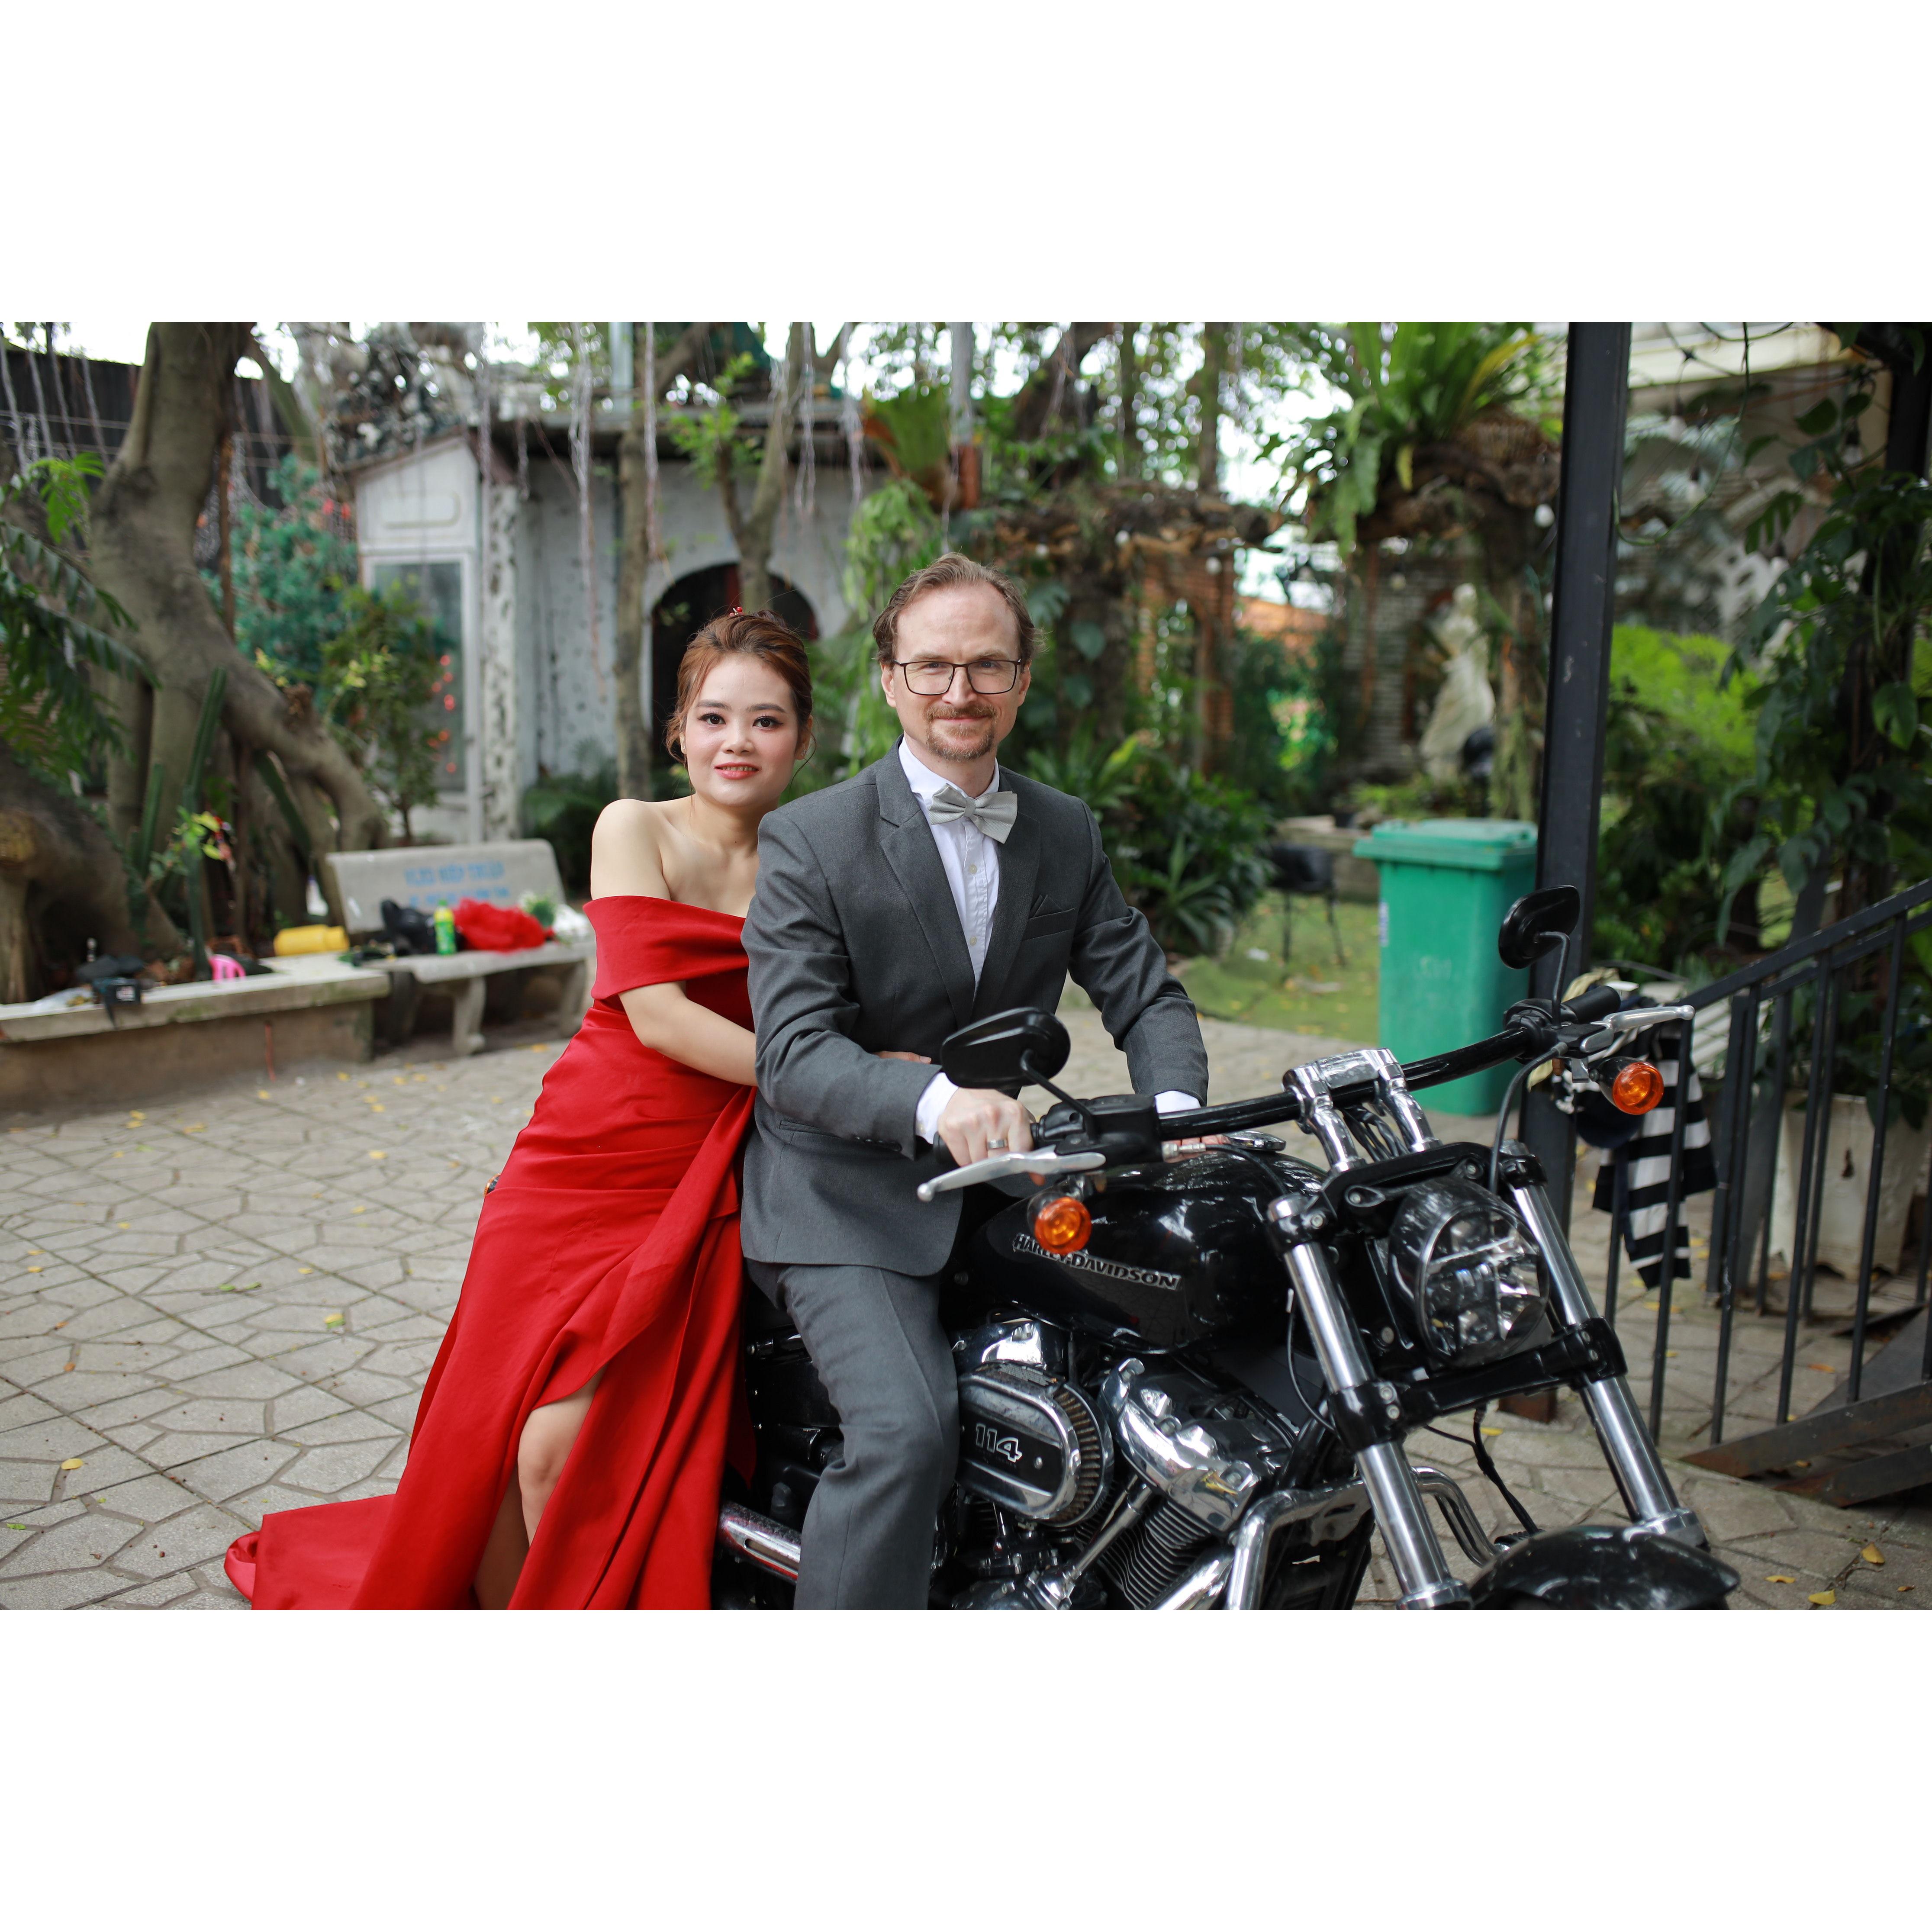 We passed a Harley to take the other pictures and Tuyen asked if we could get a photo on it before leaving.